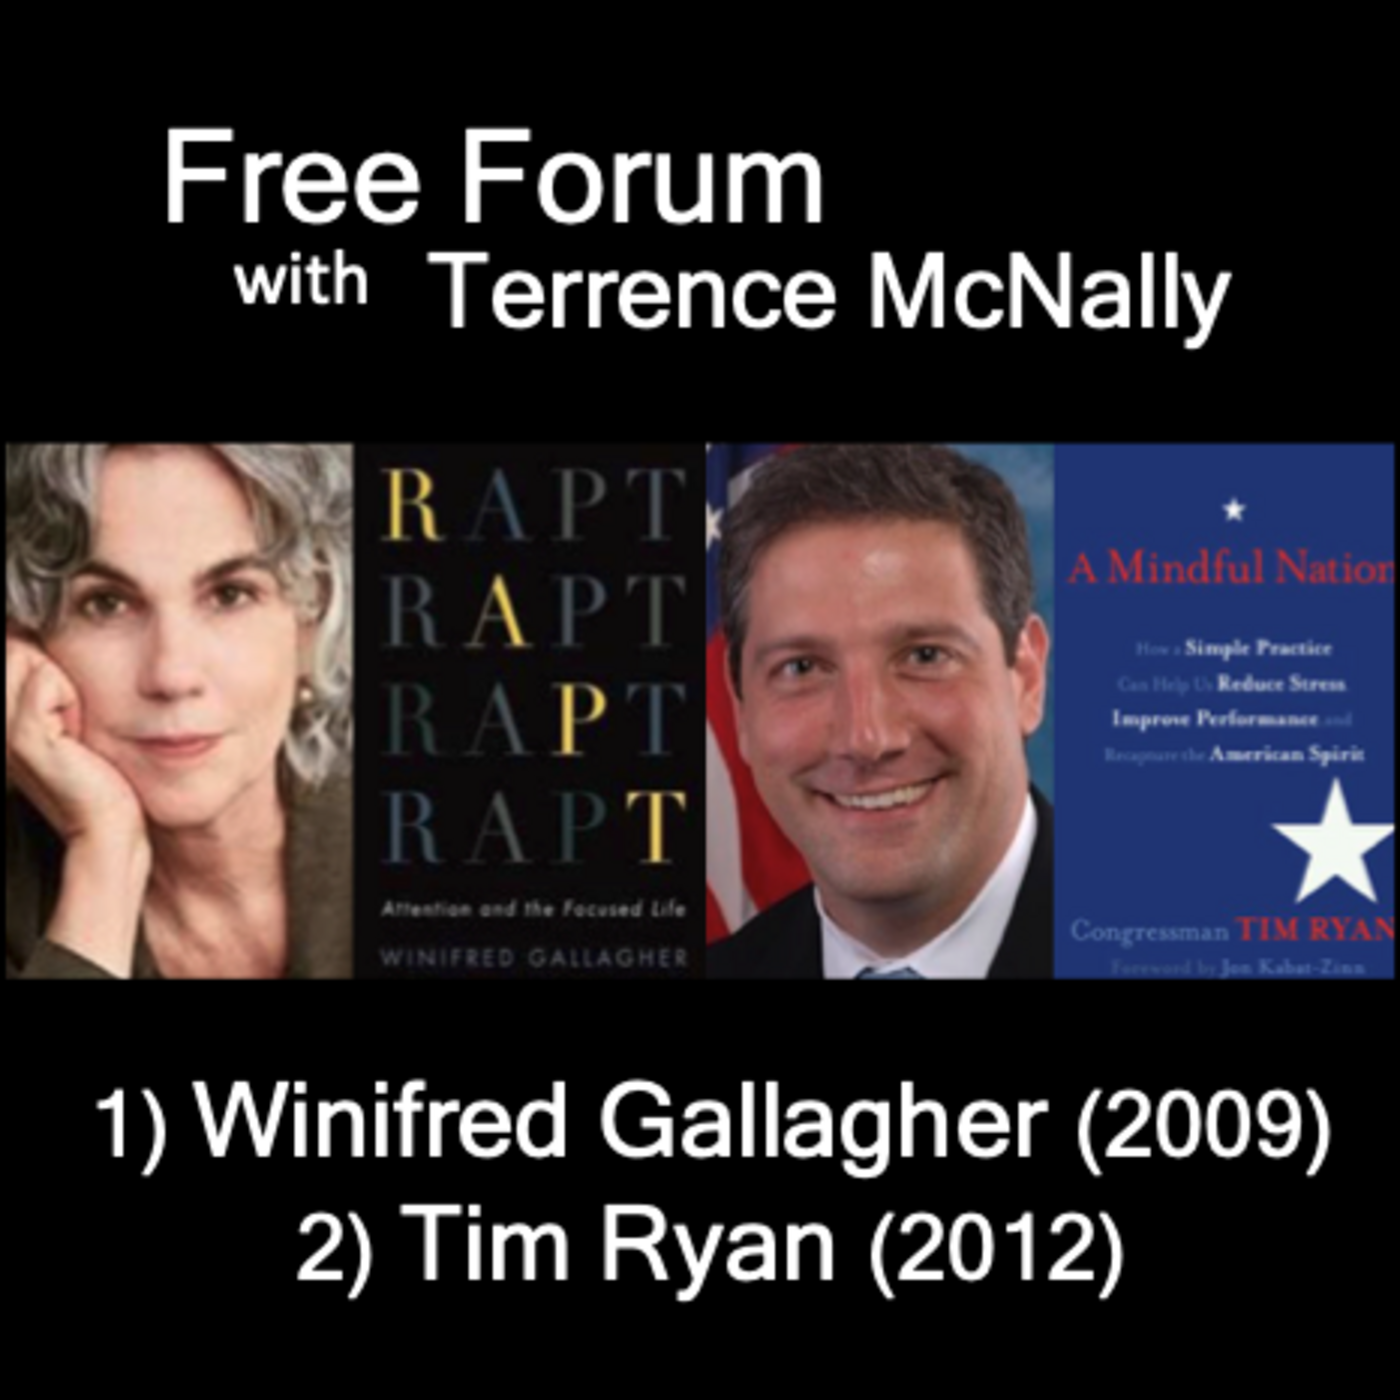 Episode 590: 1) WINIFRED GALLAGHER, Attention, our most valuable resource. 2) TIM RYAN, former Ohio Congressman on meditation